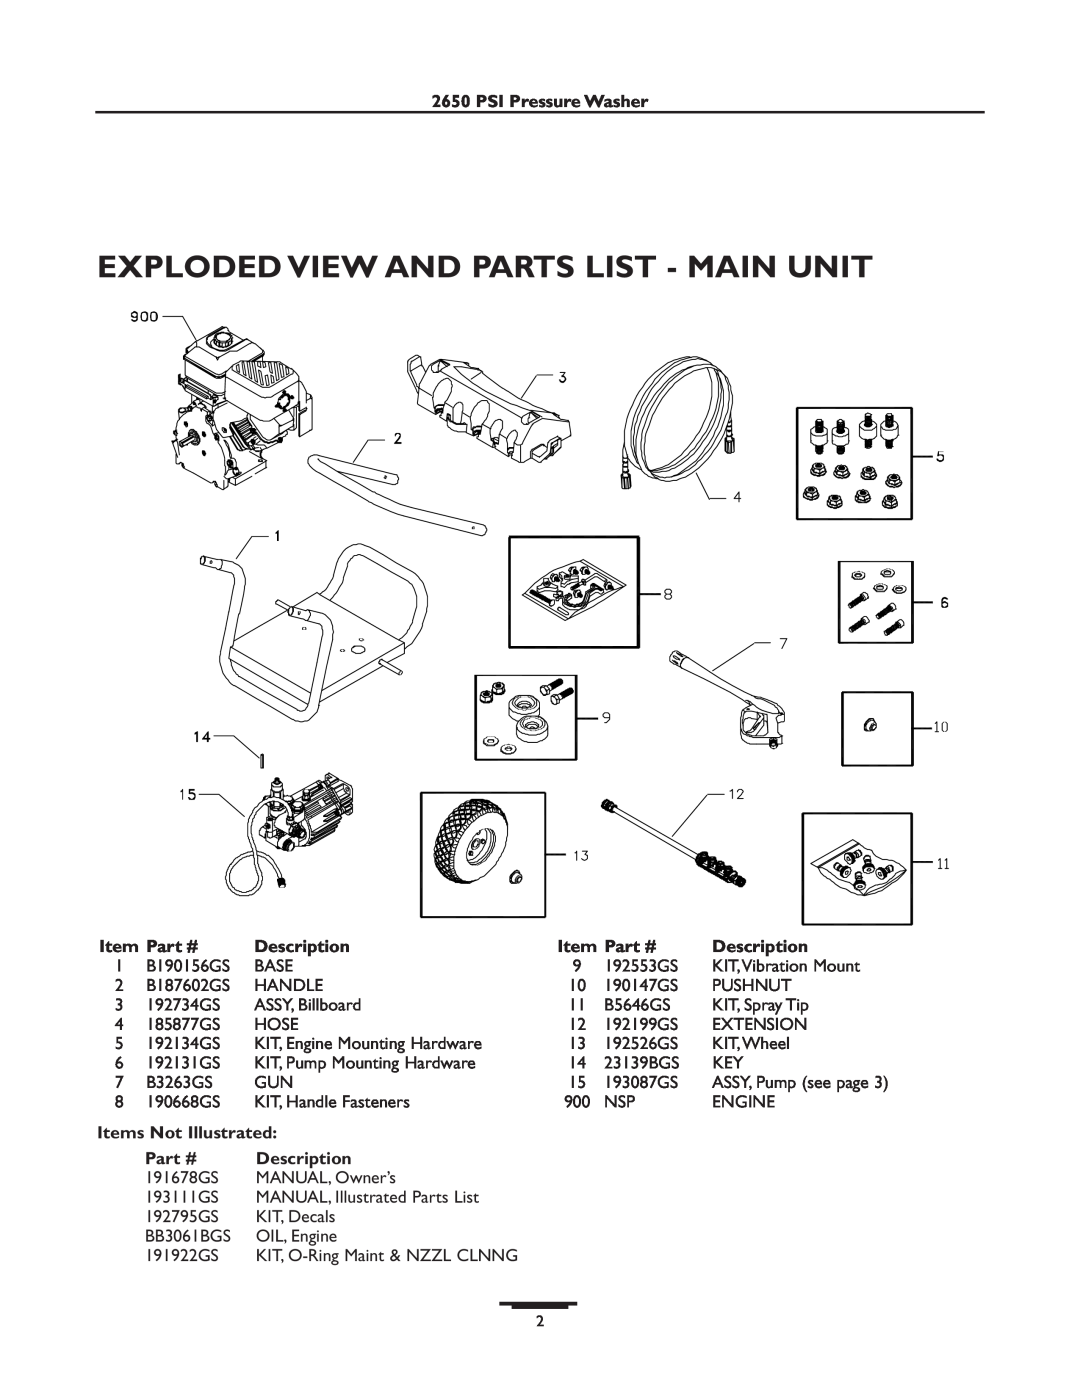 Briggs & Stratton 01805 Exploded View And Parts List - Main Unit, PSI Pressure Washer, Description, Items Not Illustrated 